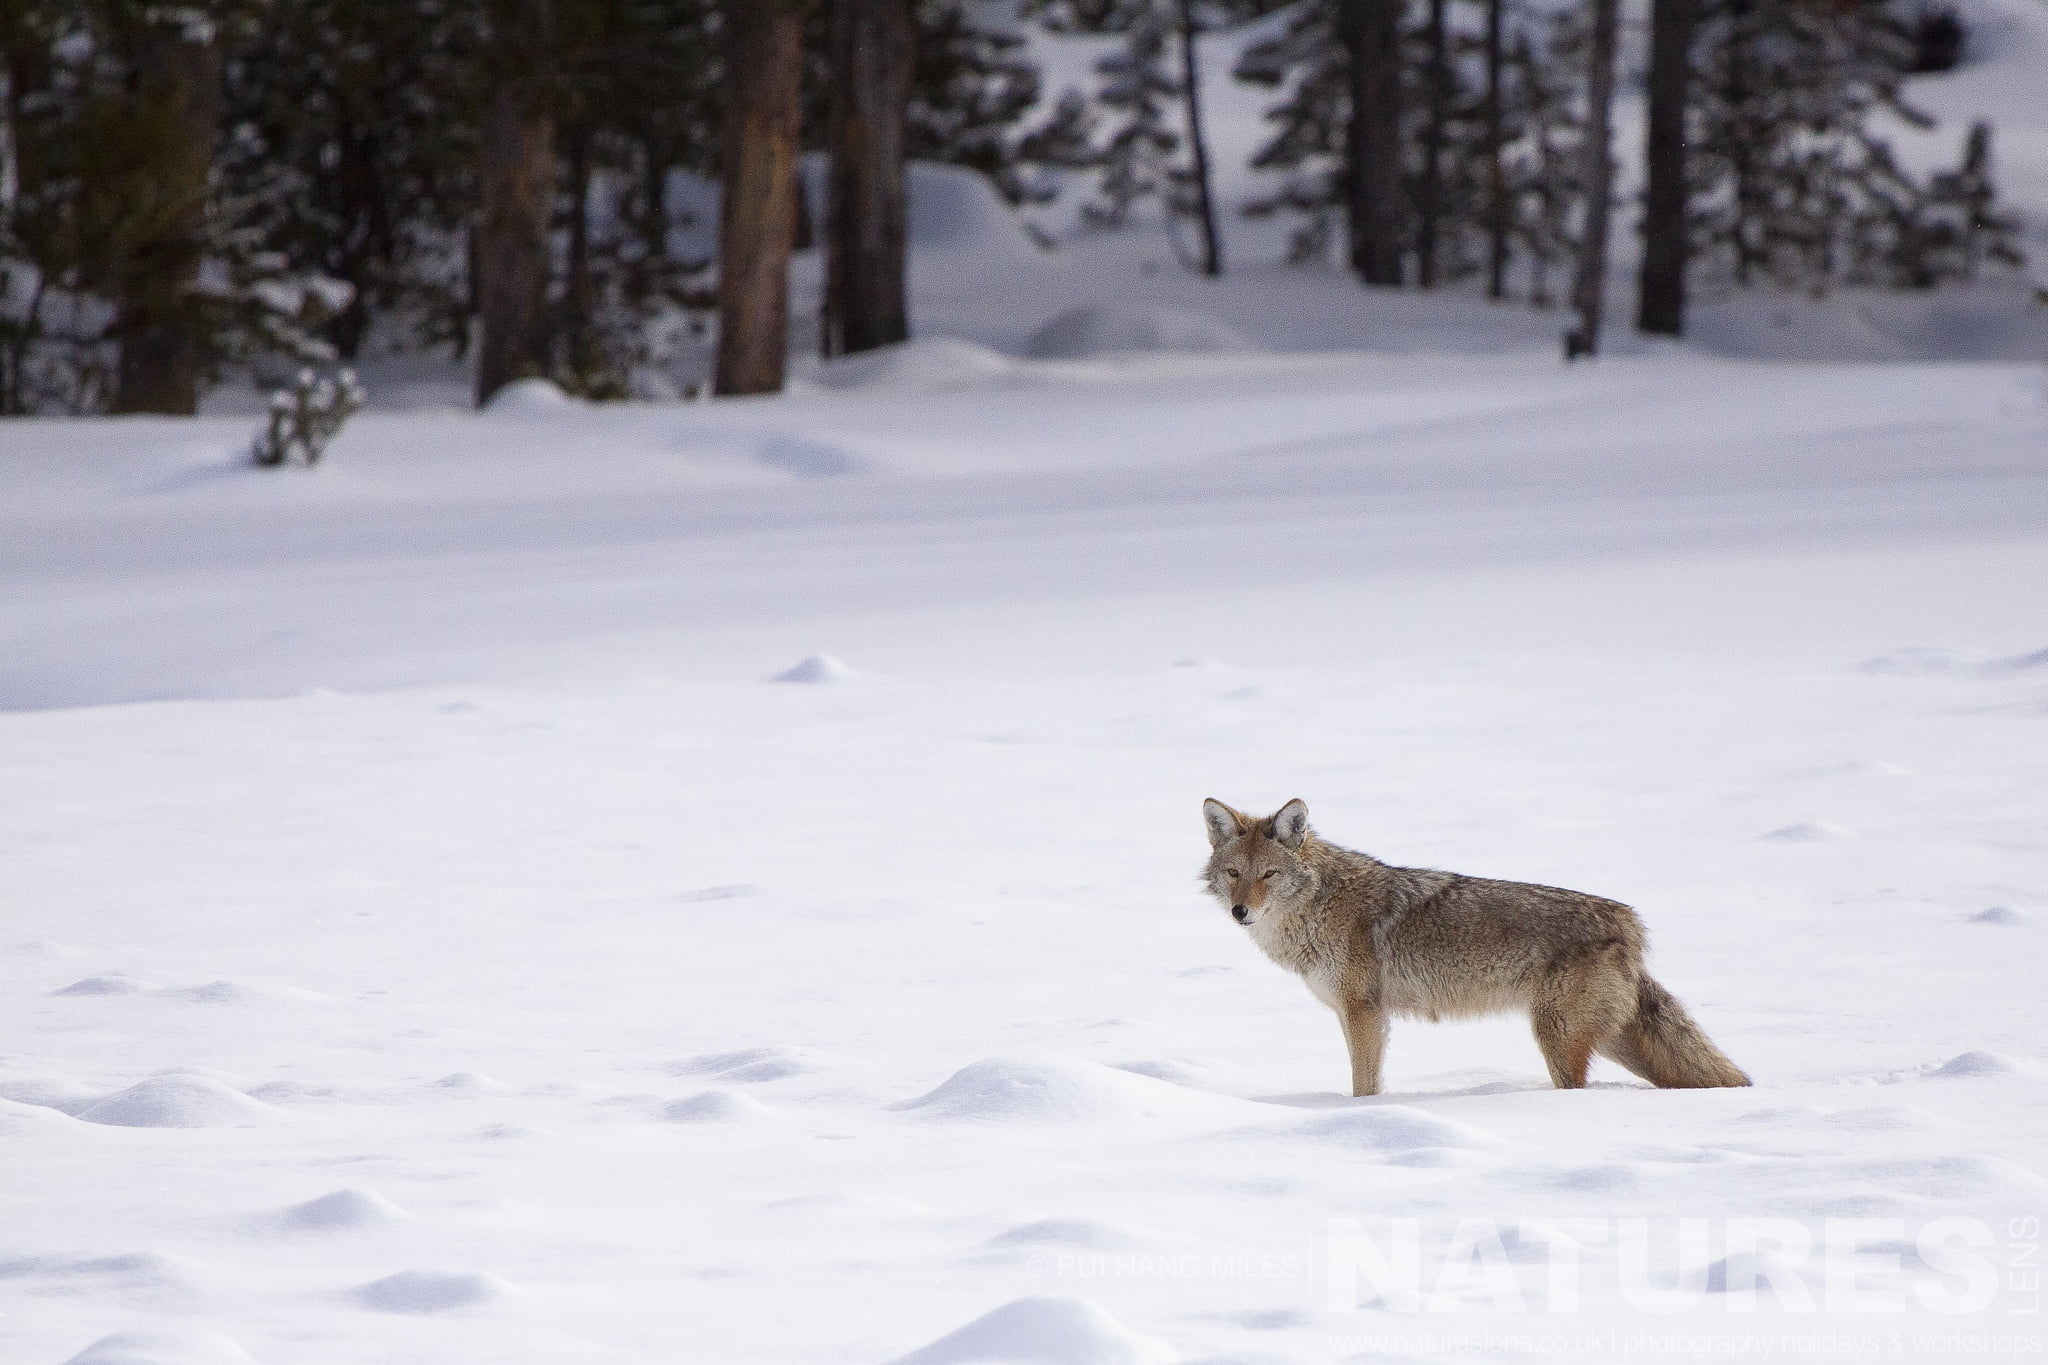 One Of Yellowstone'S Coyotes Pauses As It Crosses The Snowy Landscape Typical Of The Type Of Image That You Will Capture During The Wildlife Of Yellowstone In Winter Photography Holiday